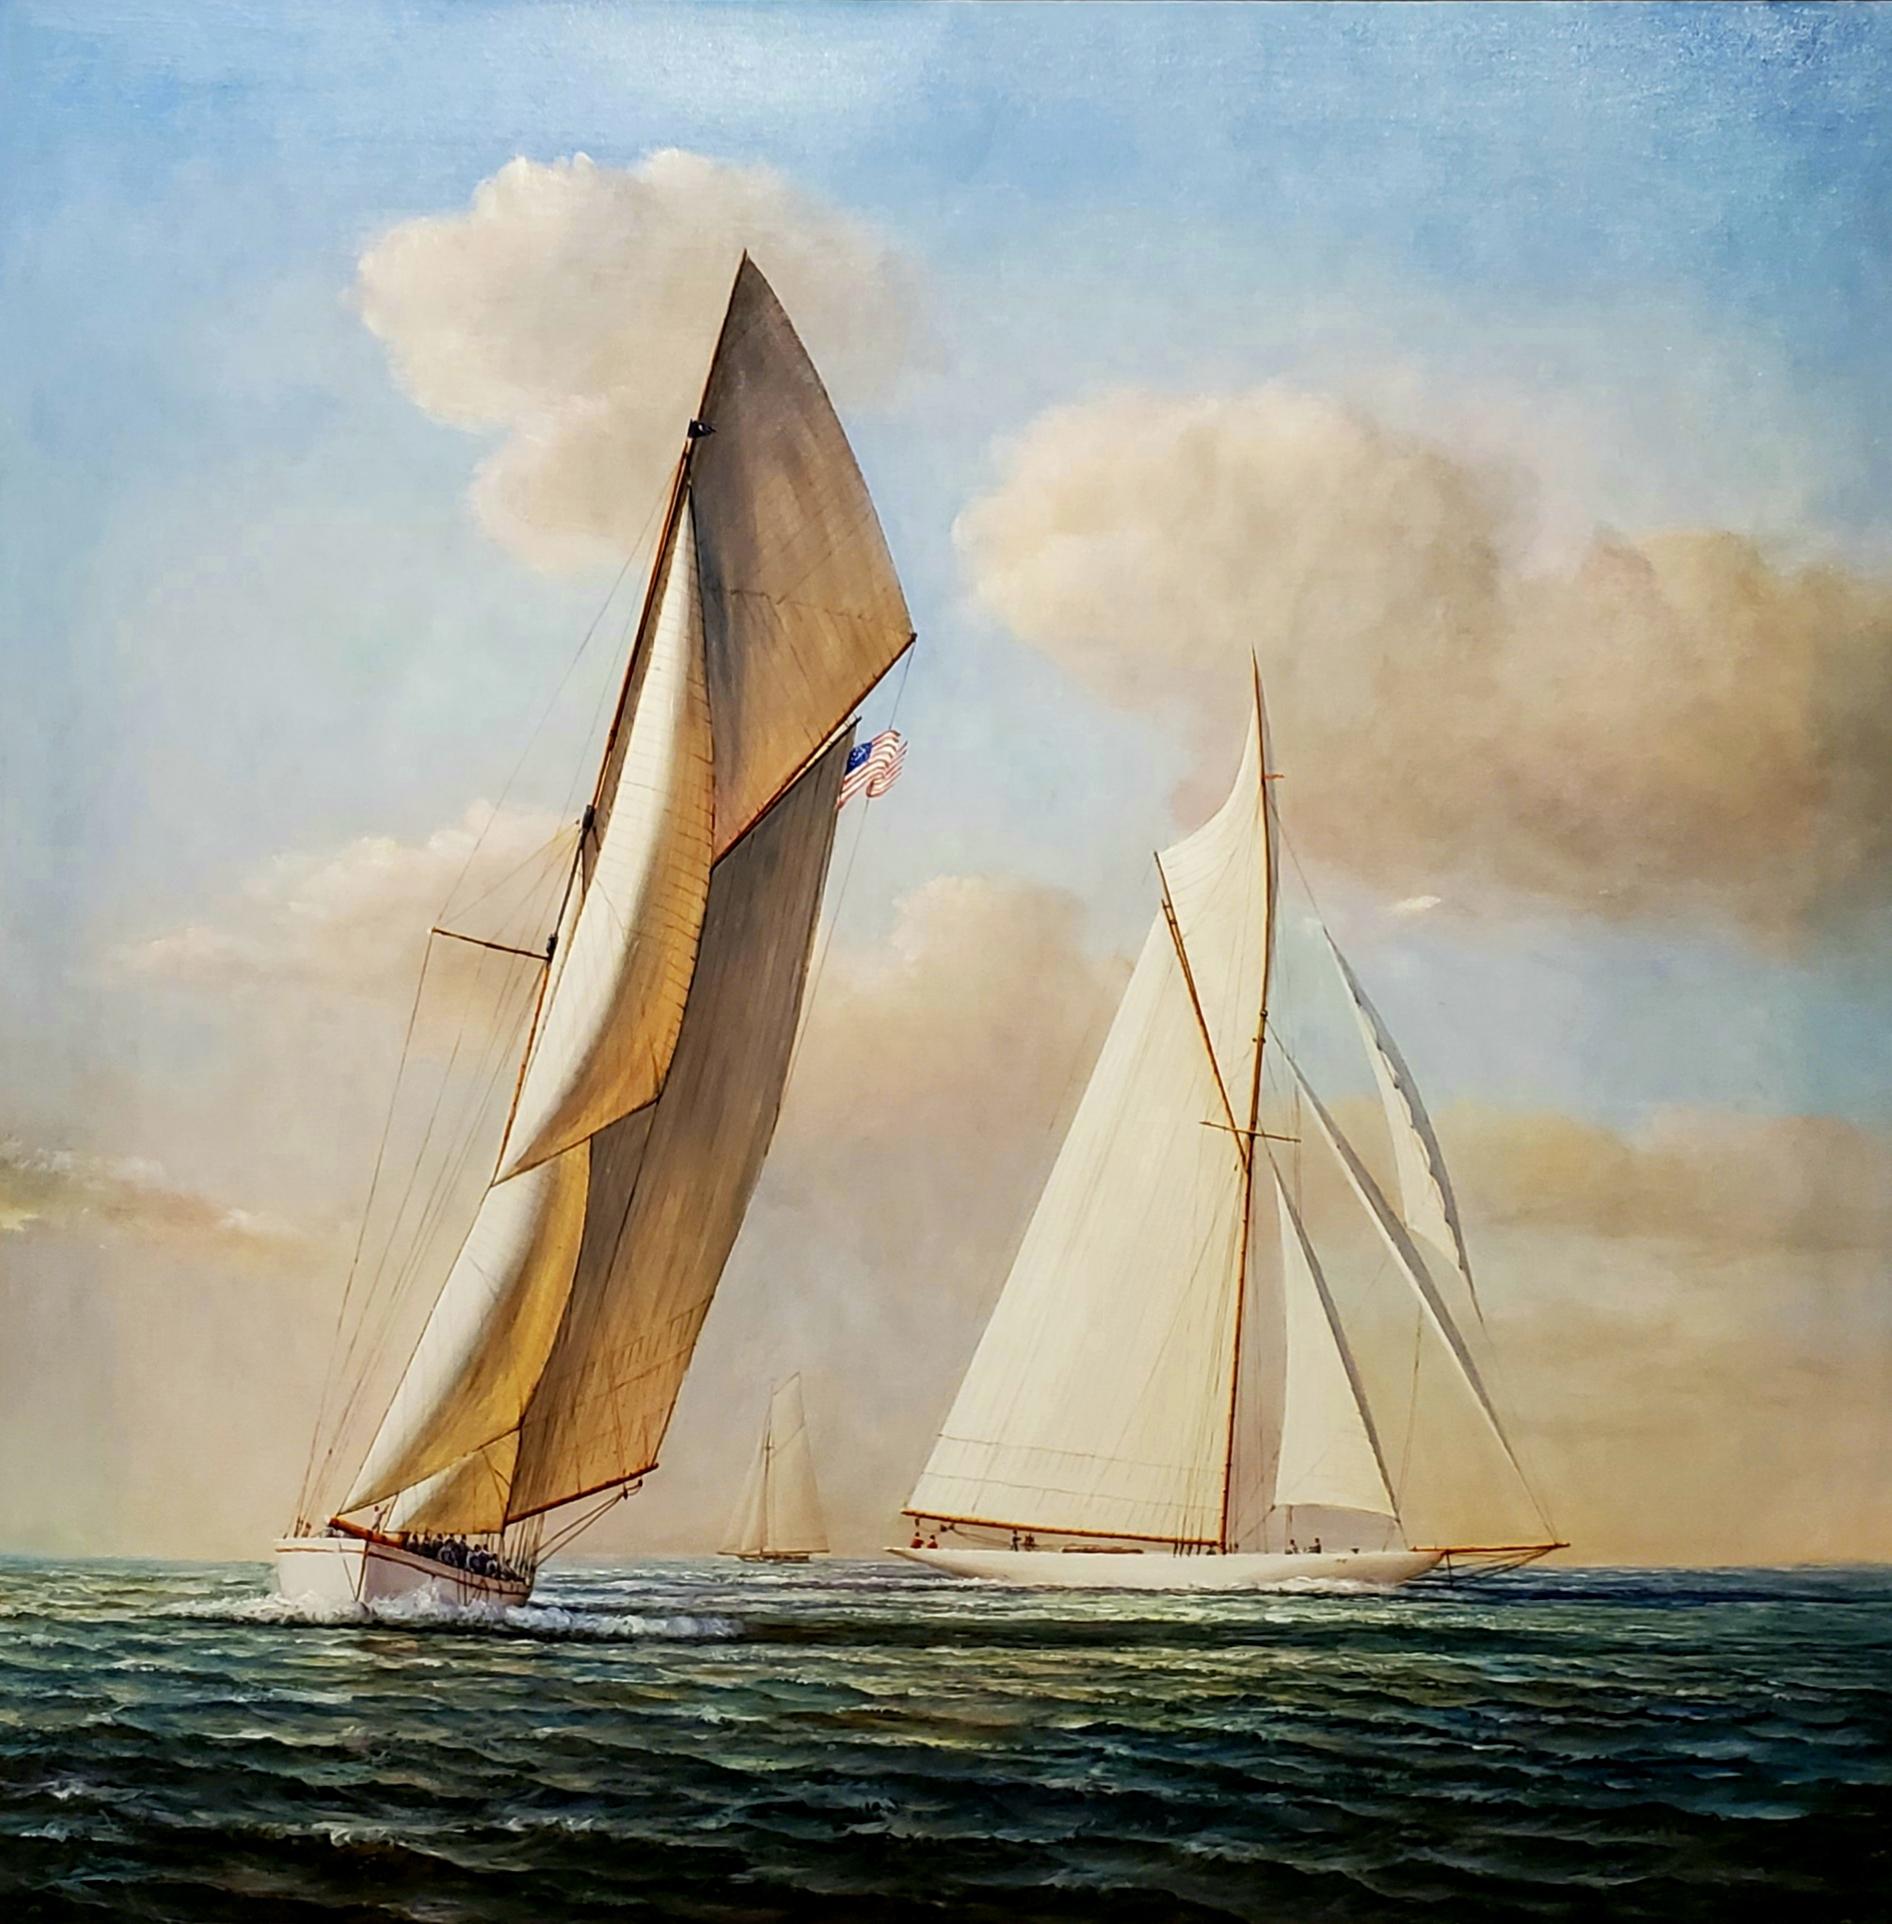 Wide Maritime Landscape Painting of 3 Sailboats At Sea by D. Tayler 2